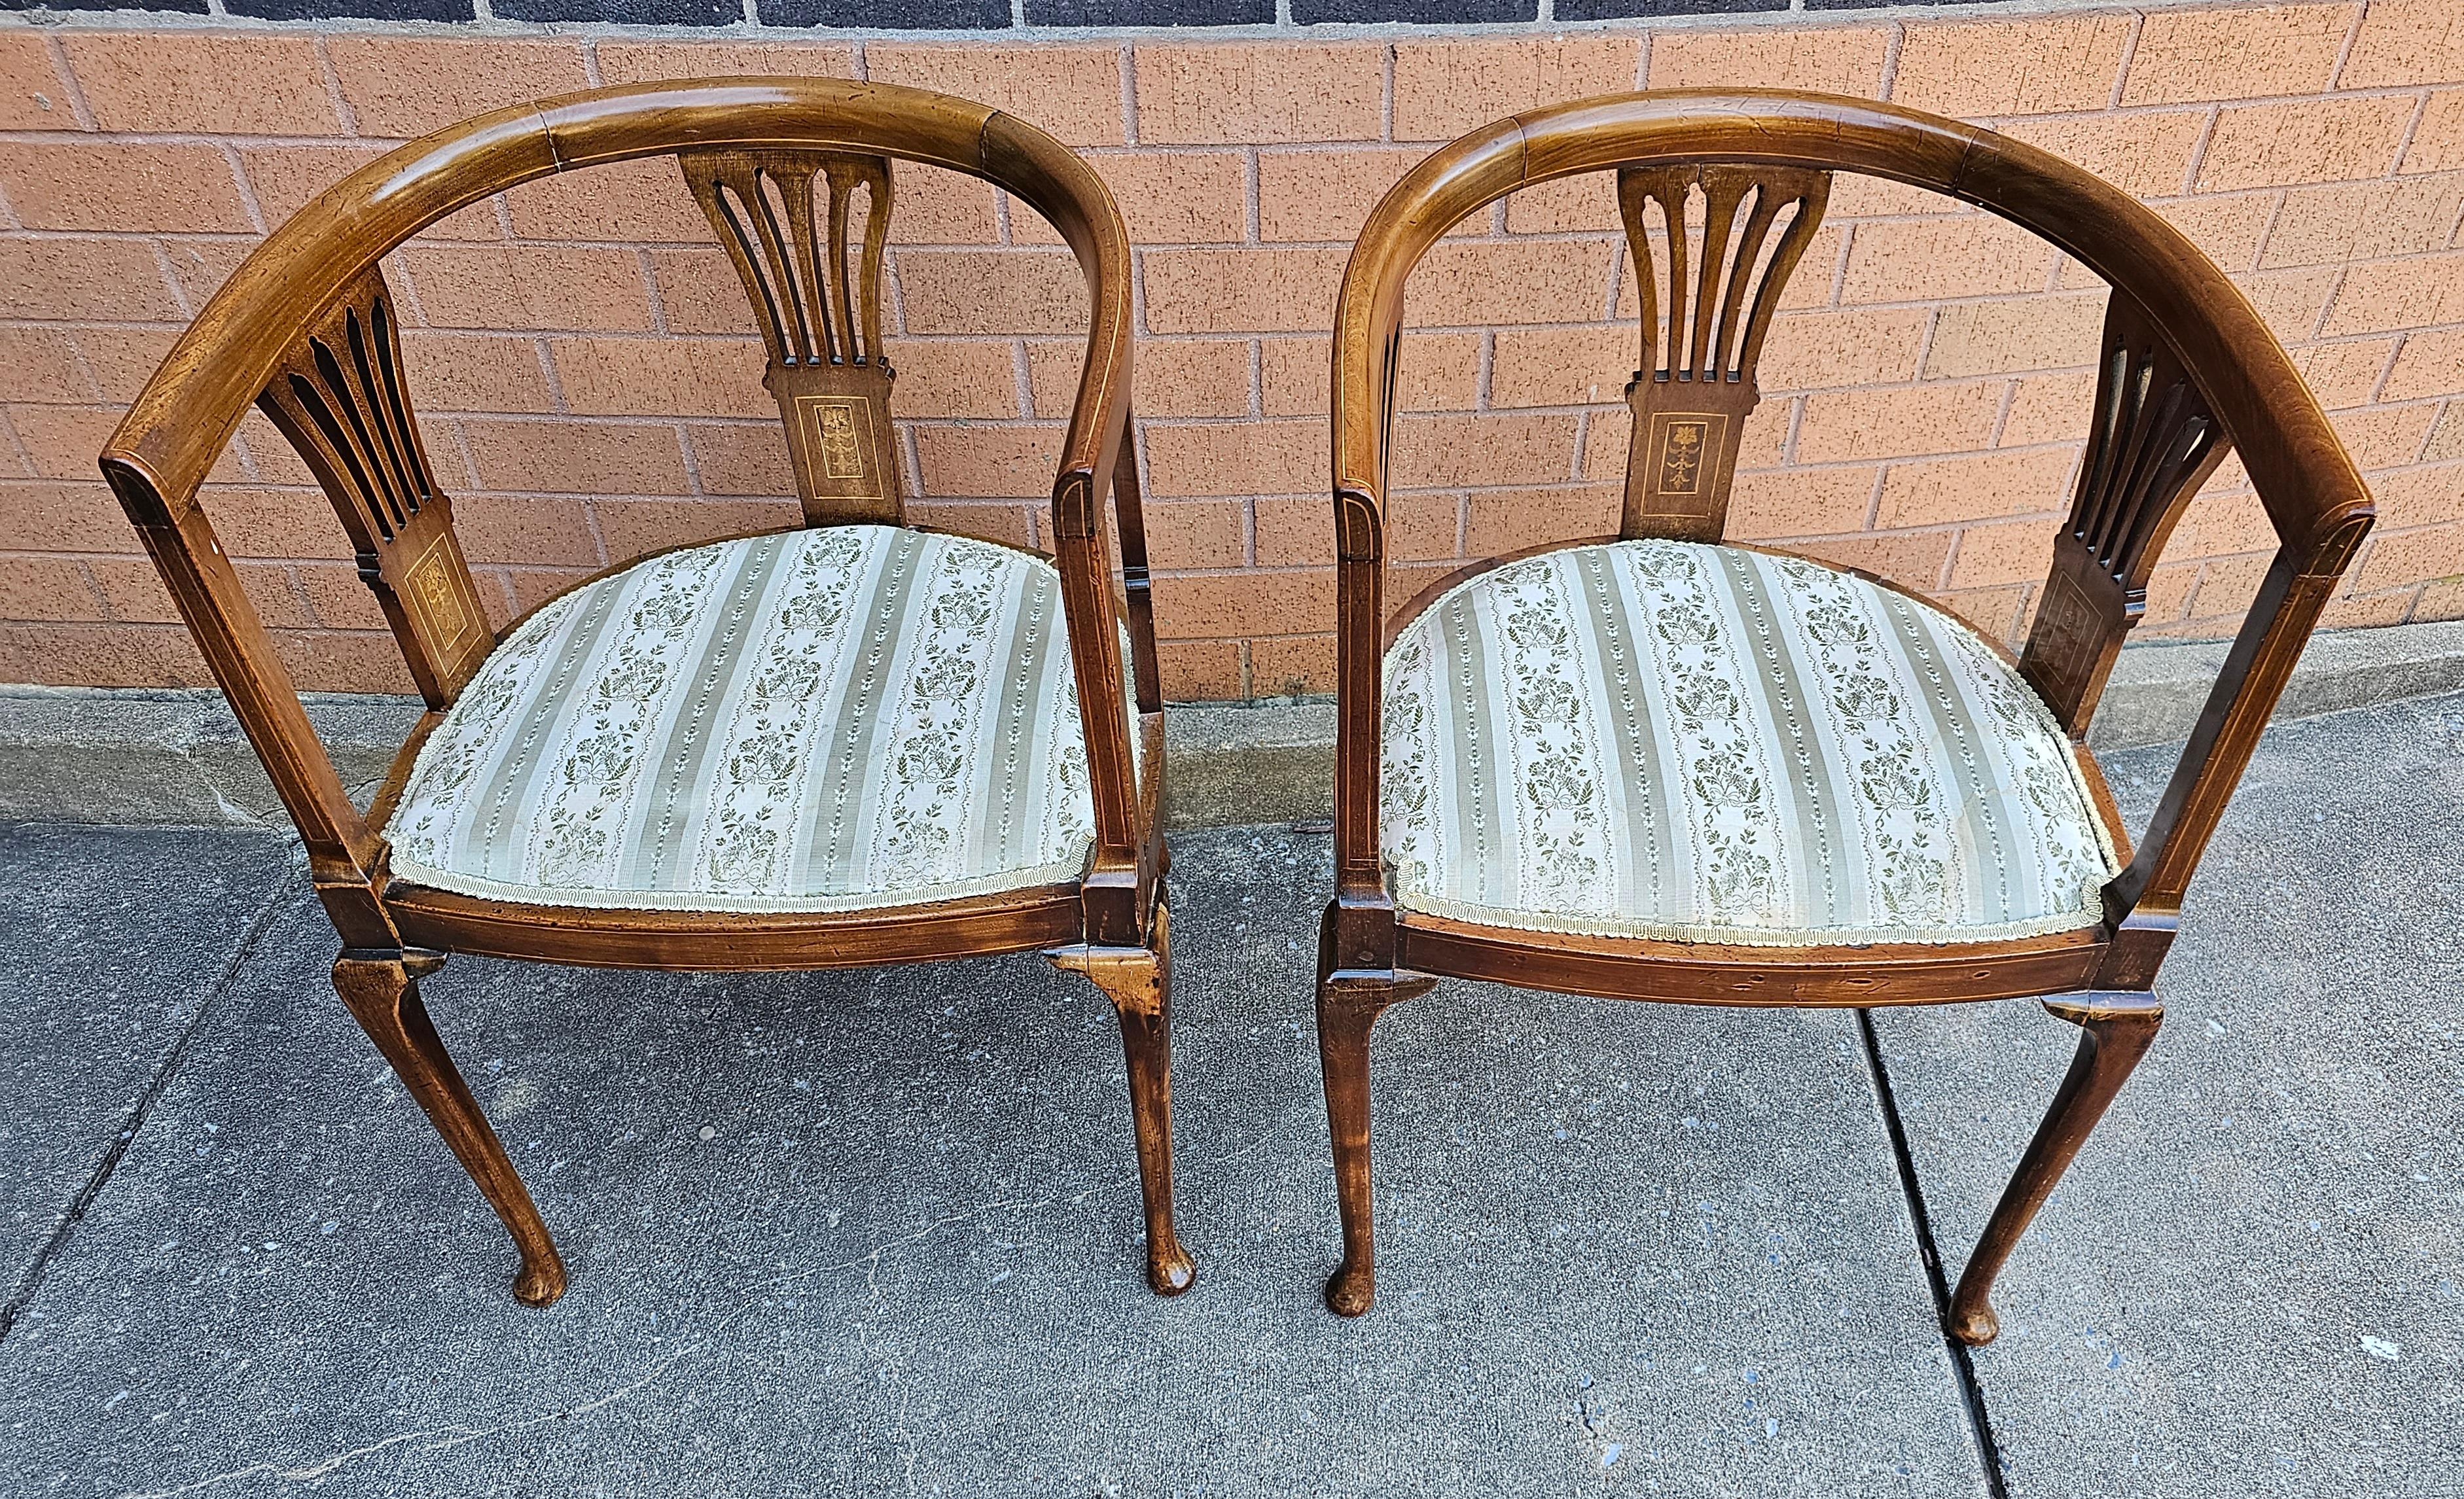 Exquisite Pair of  Edwardian Satinwood Inlaid Mahogany Barrel-Back Upholstered Club chairs with great patina. 
Very fine satinwood flower inlays on back sleighs and frame. Measures 21